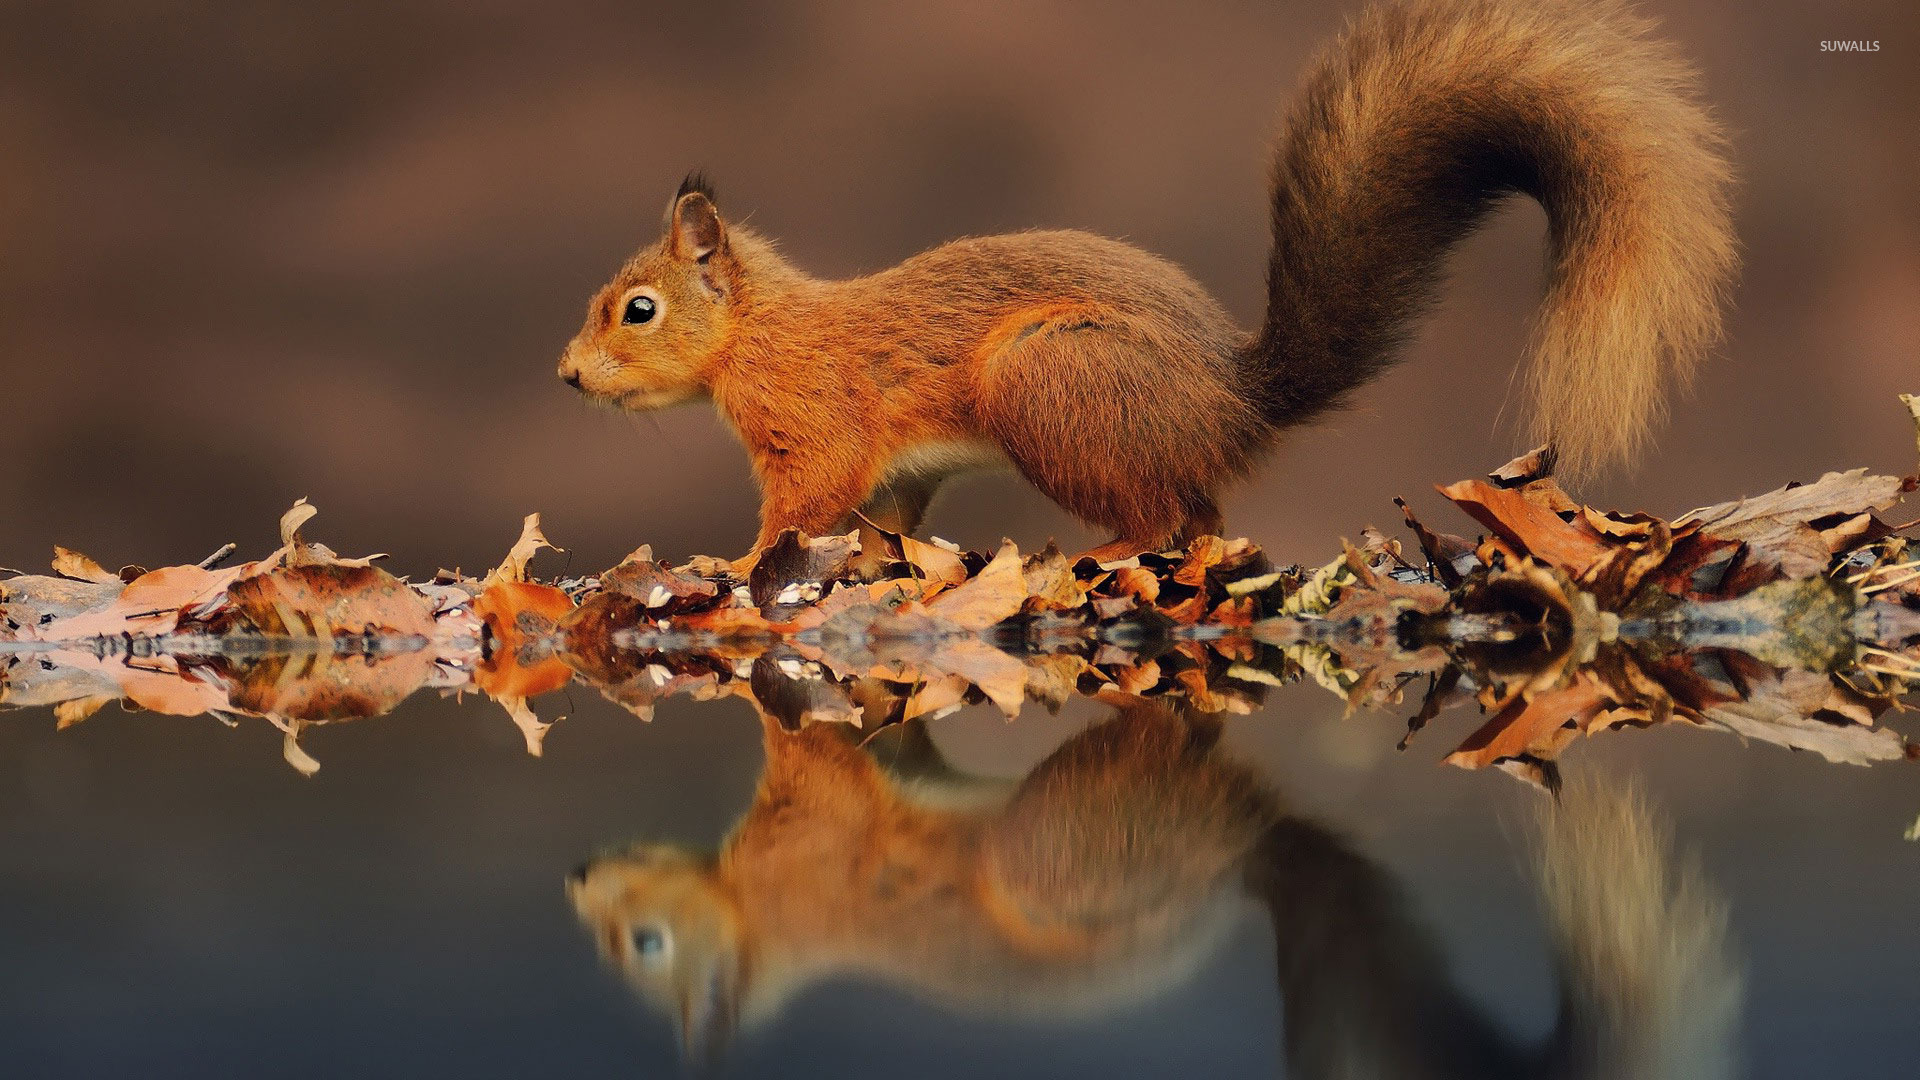 Fall Wallpaper With Squirrel